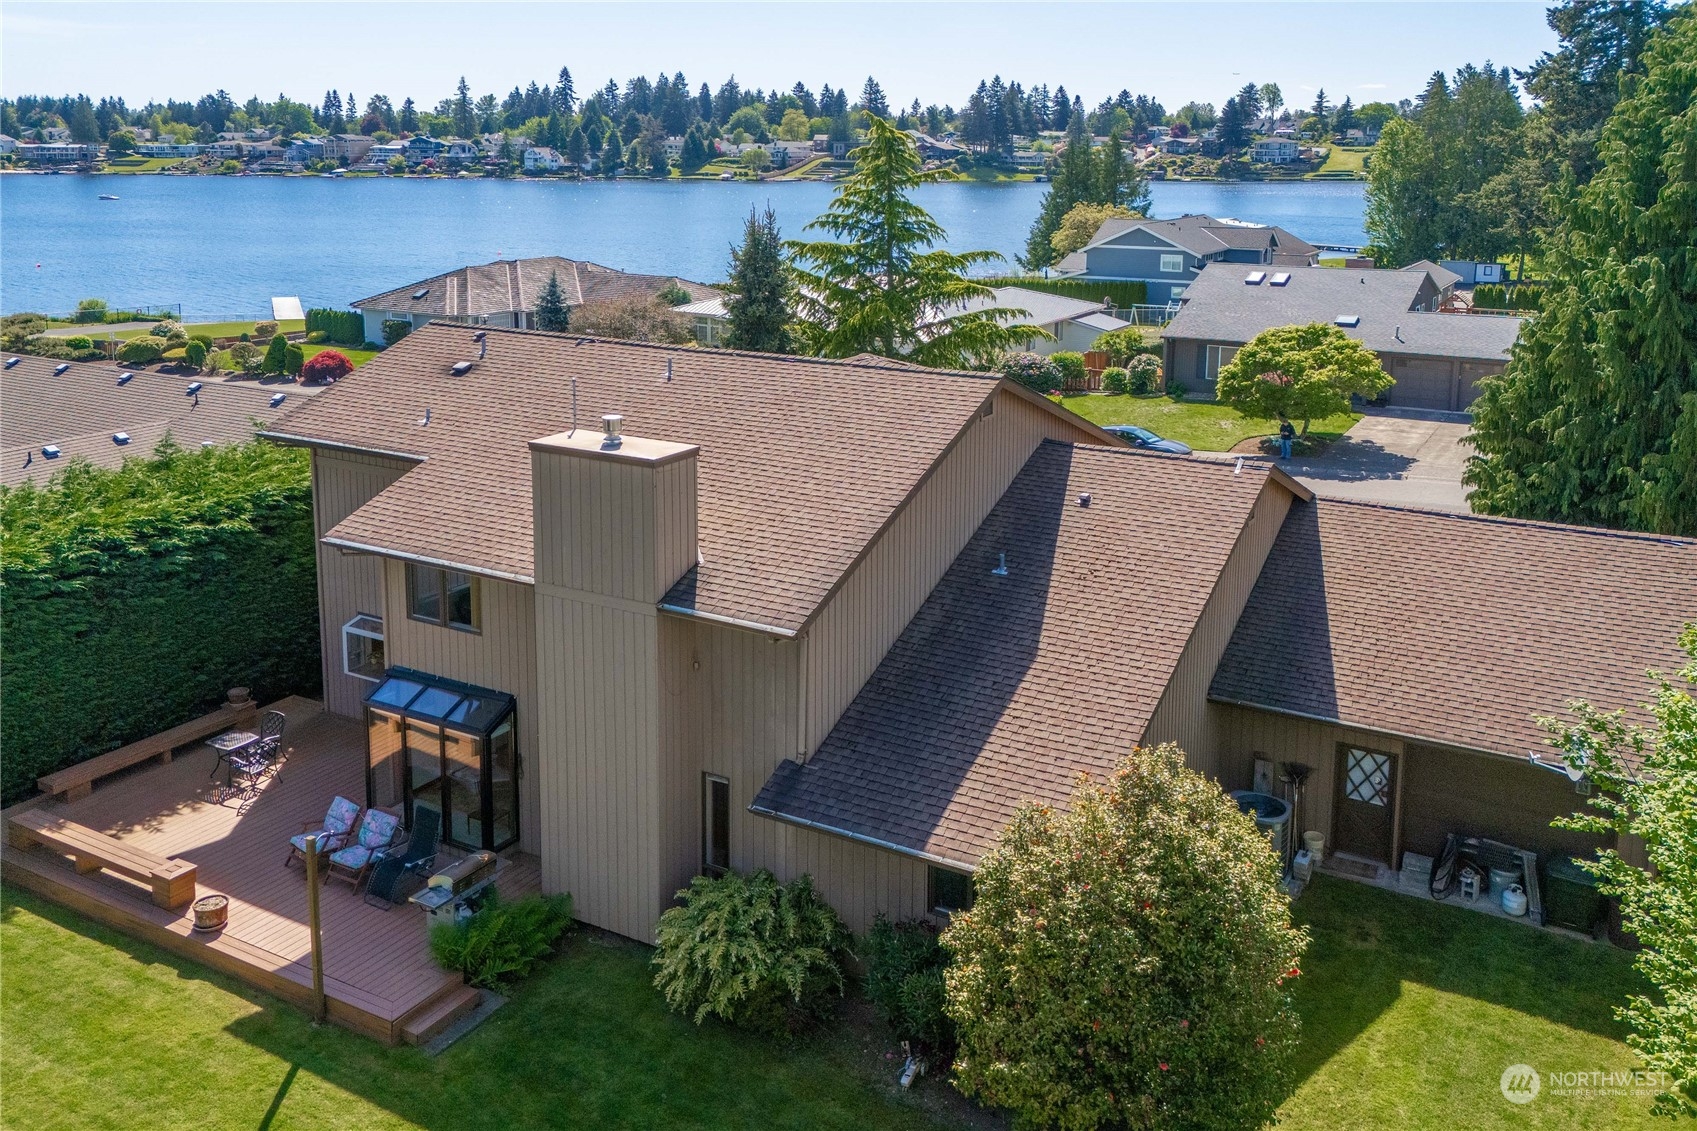 an aerial view of a house with outdoor space and lake view